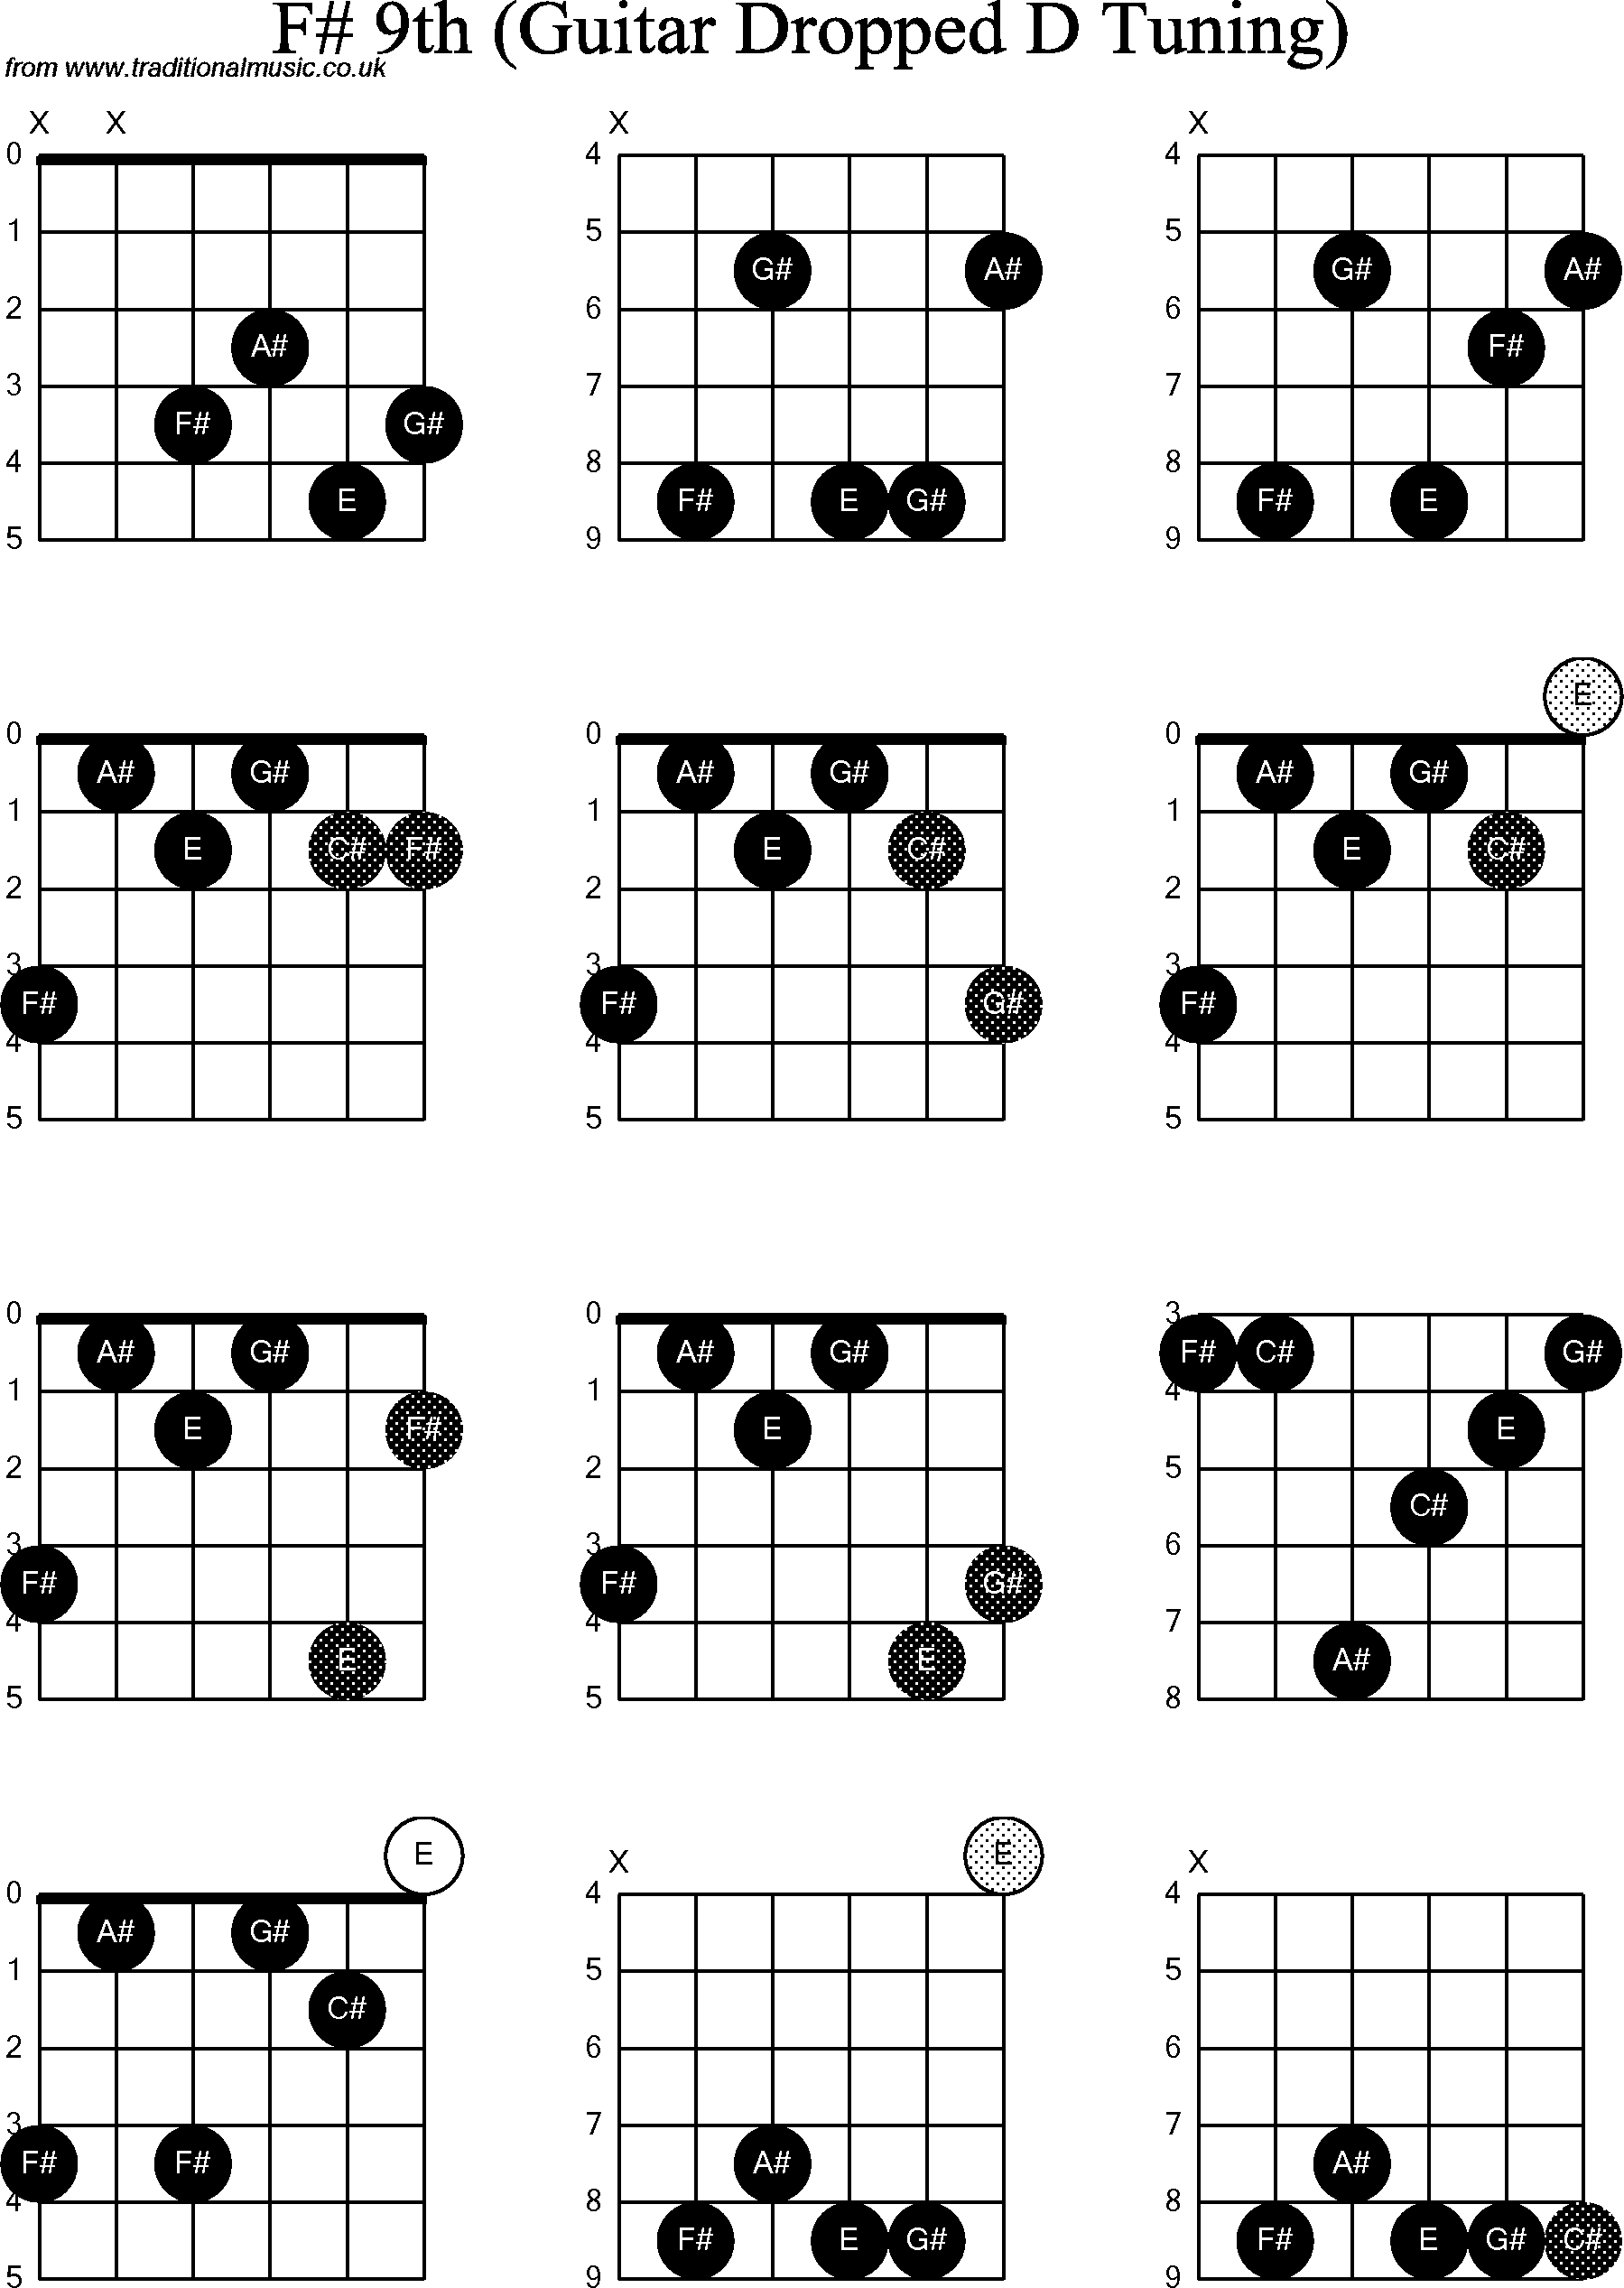 Chord diagrams for dropped D Guitar(DADGBE), F Sharp9th